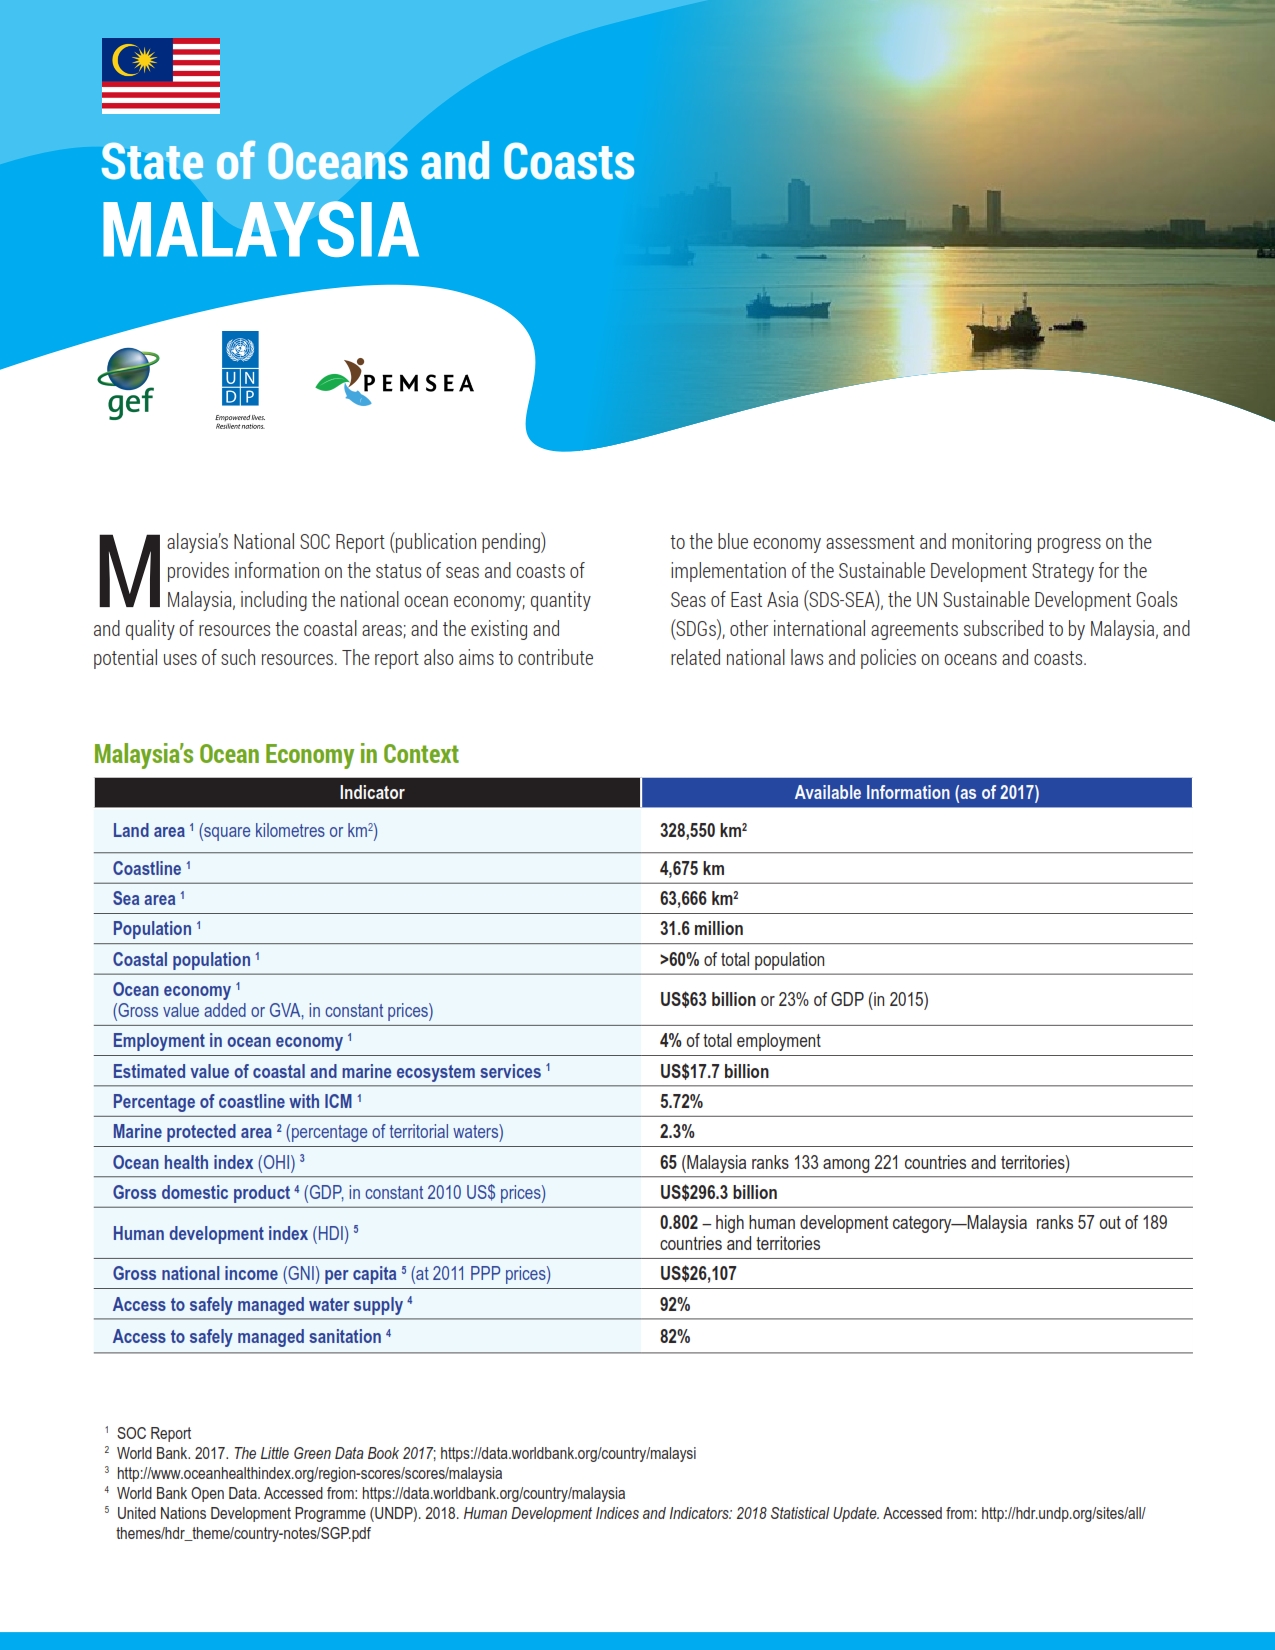 State of Oceans and Coasts of Malaysia